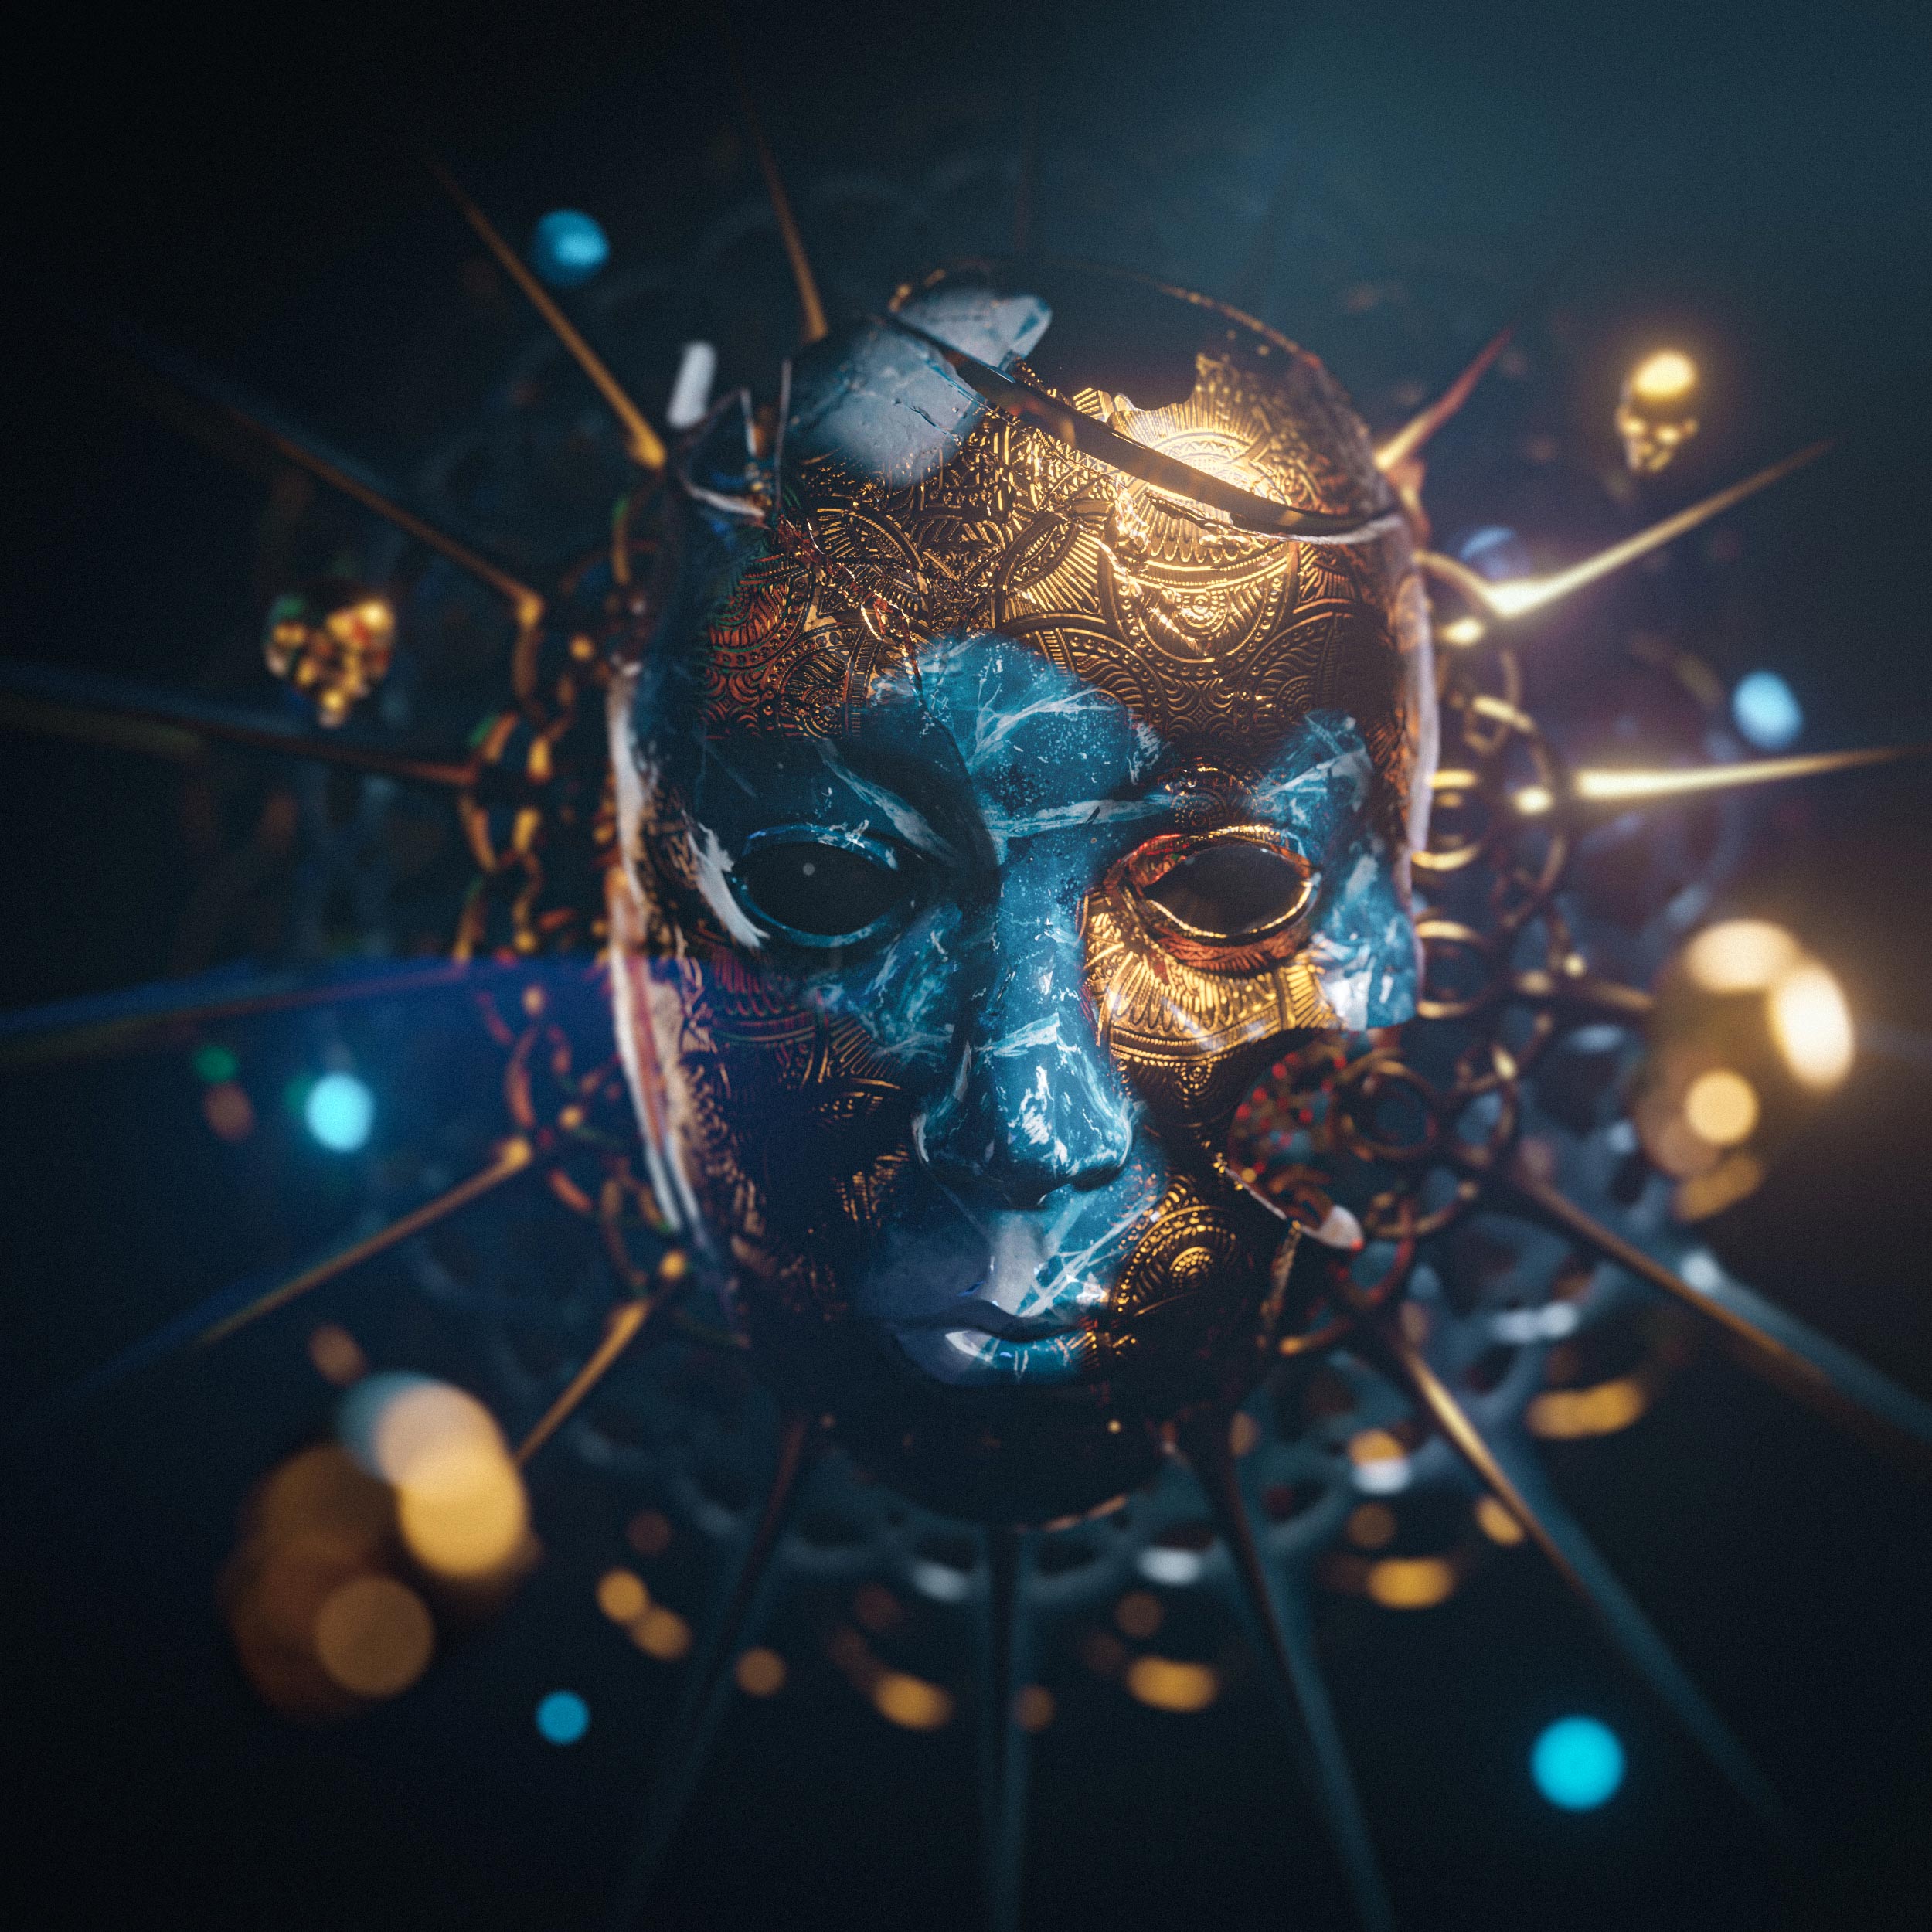 3d artwork of a mask by jonathan c